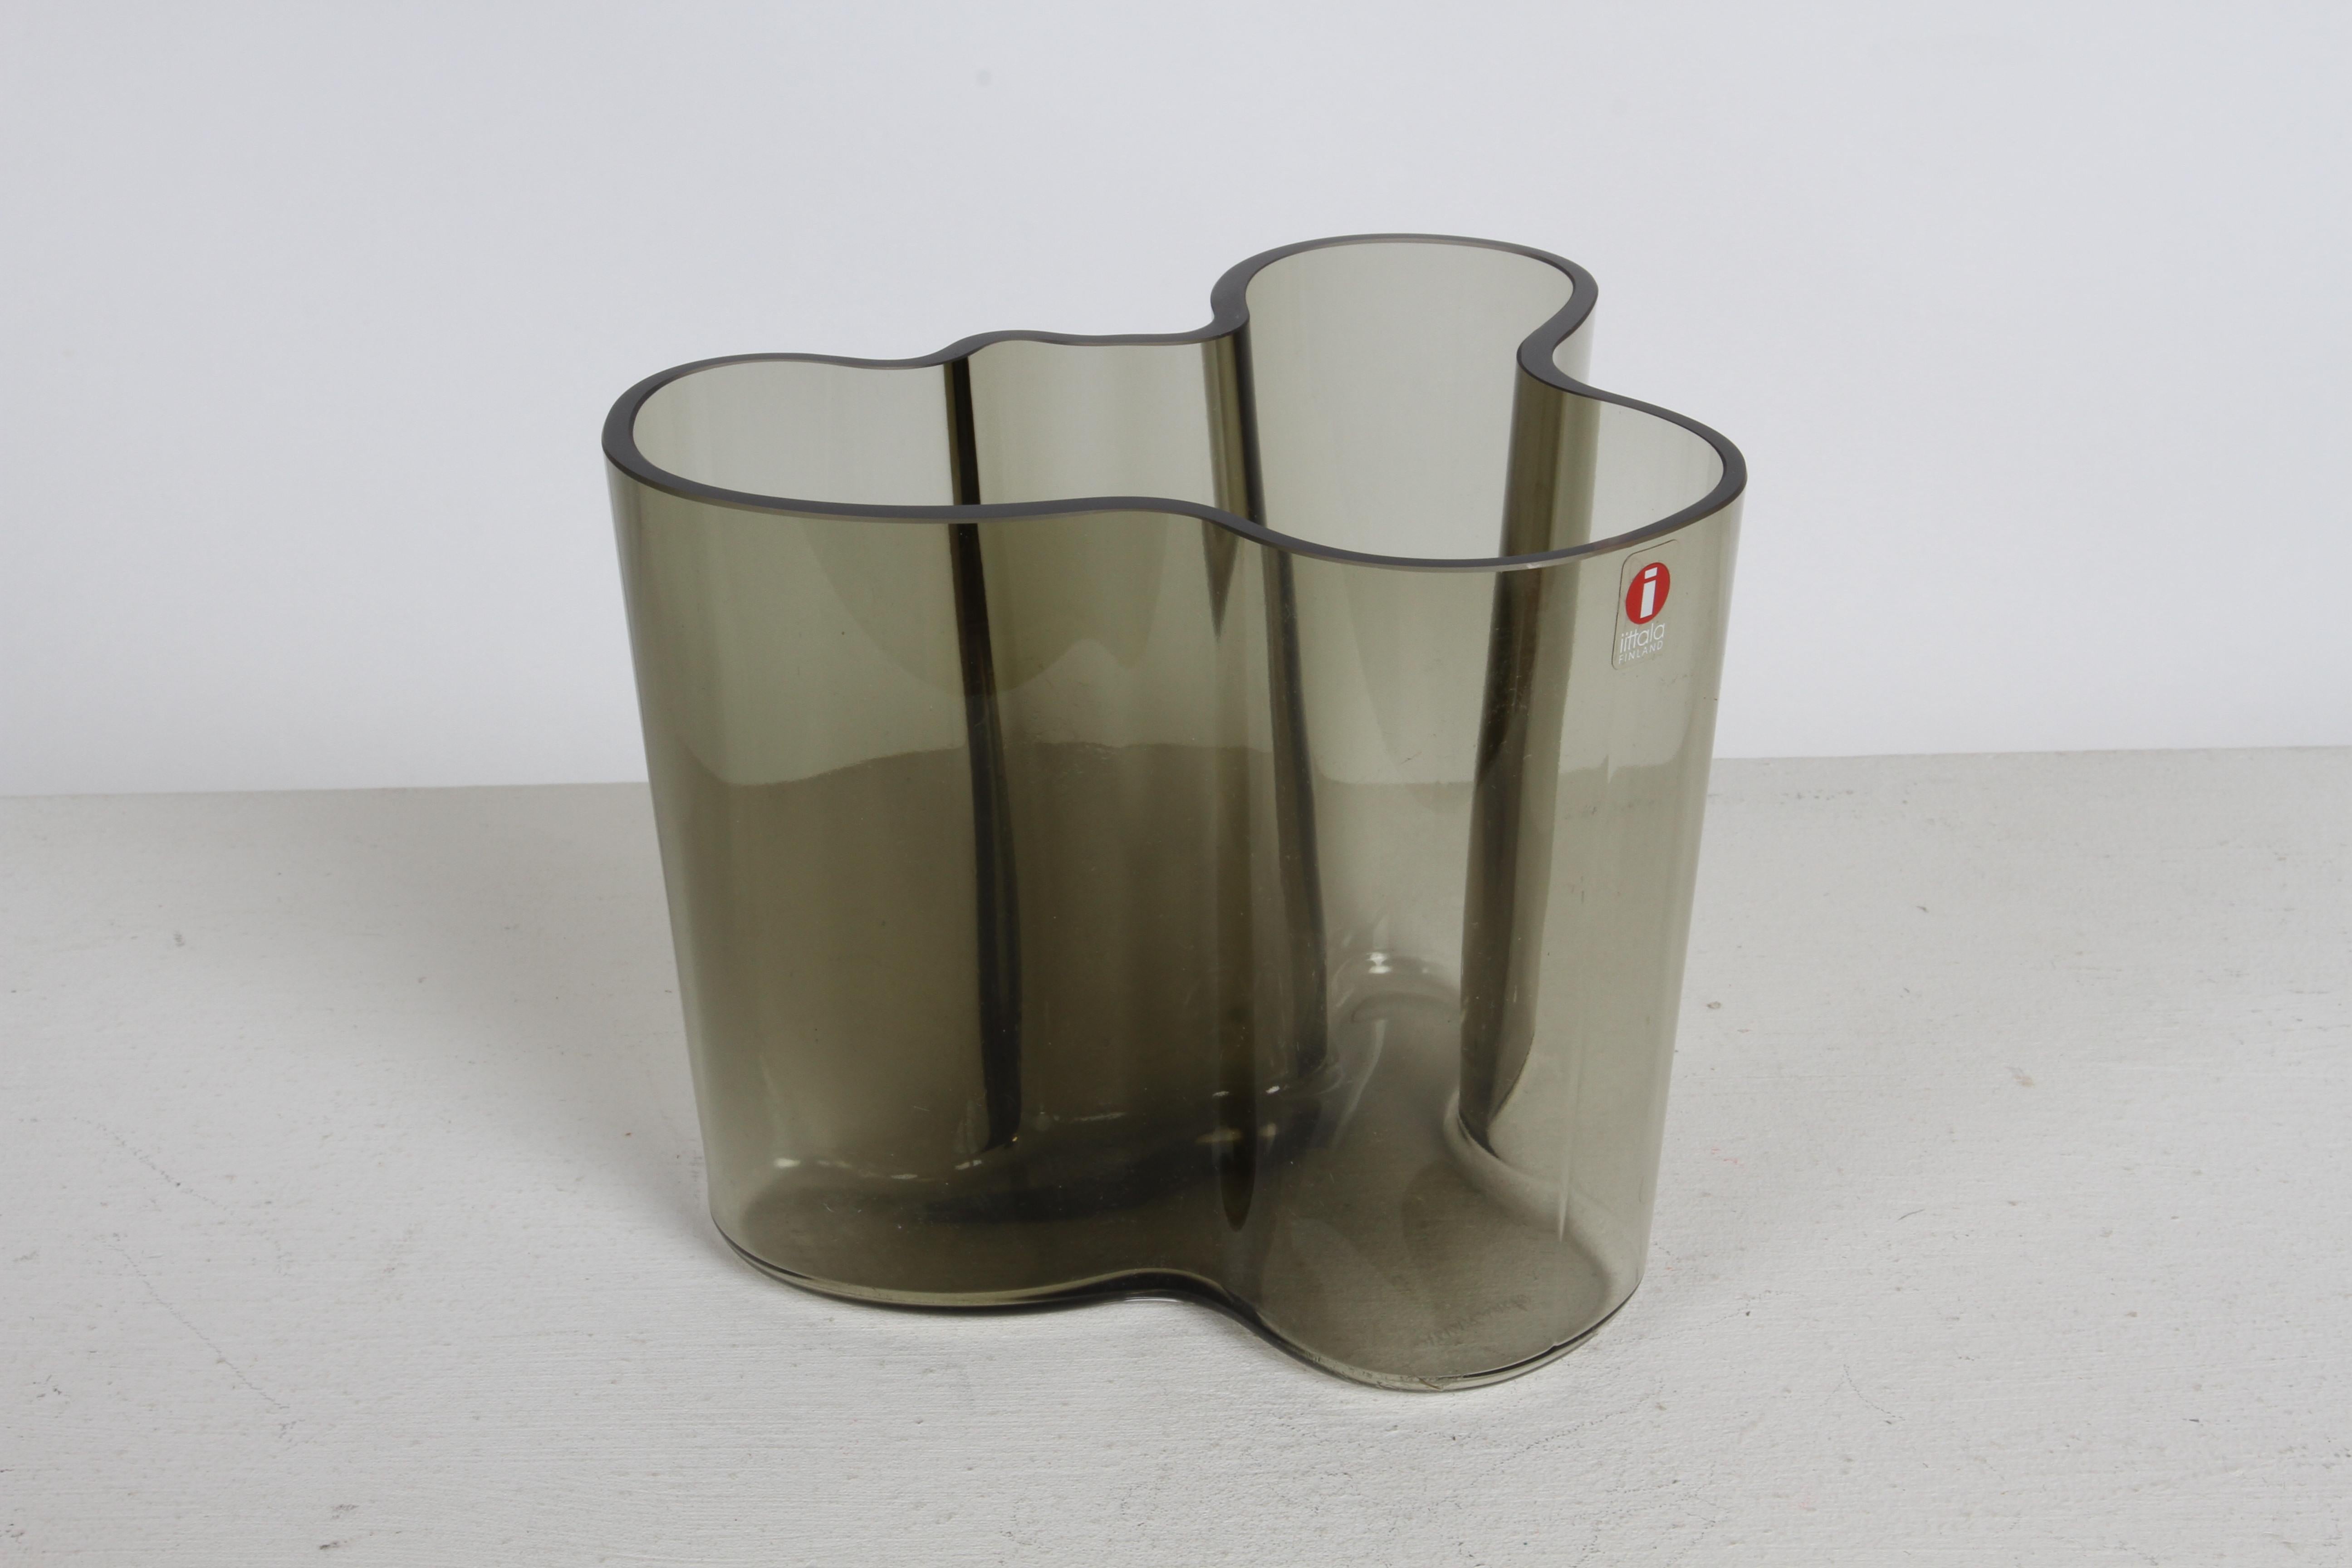 1970s MCM Alvar Aalto Savoy Vase 3030 in Smoke Gray Glass by Iittala Finland For Sale 4